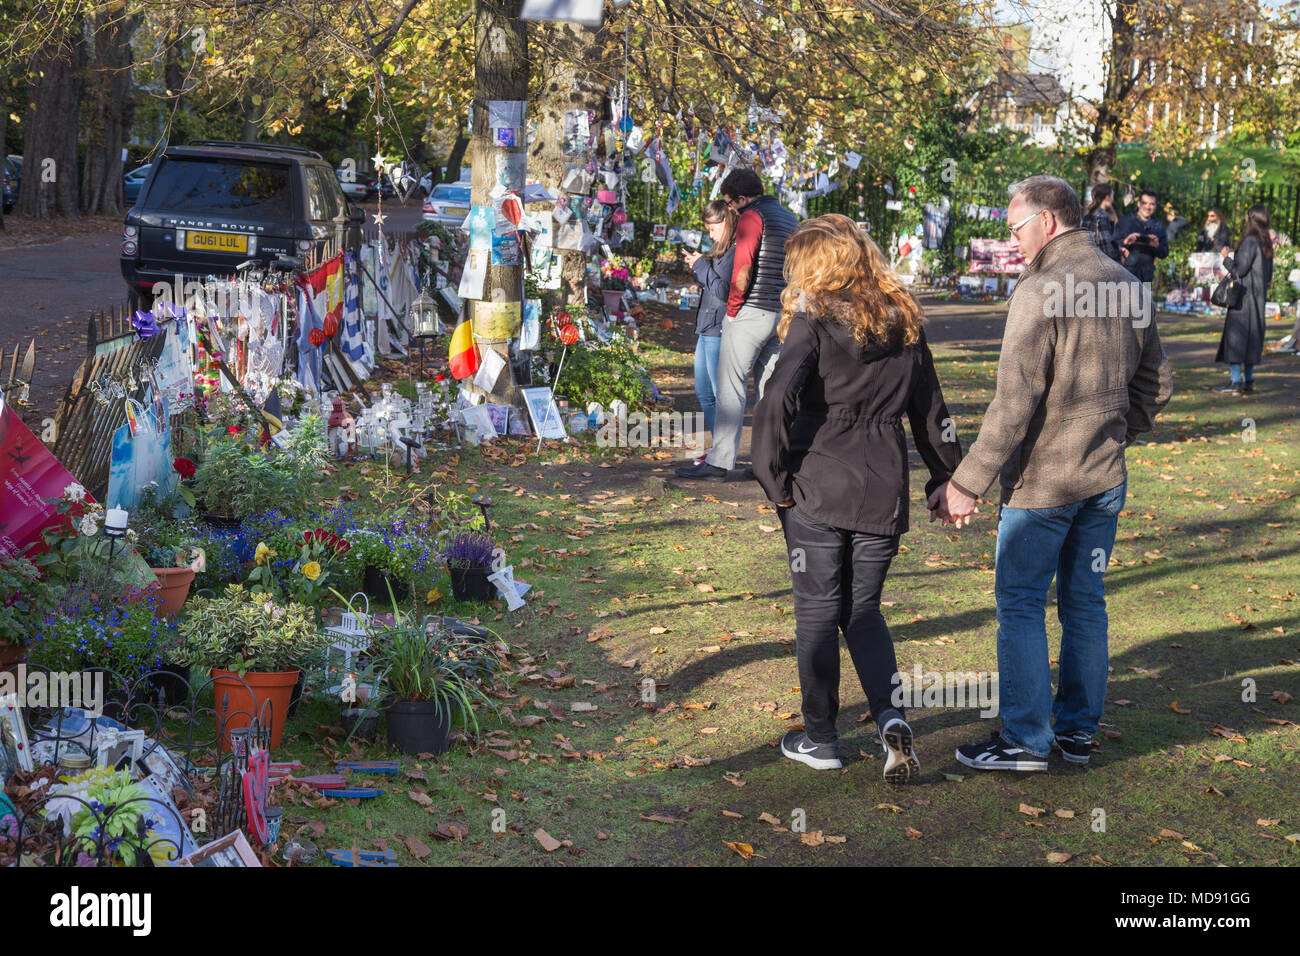 Visitors at an impromptu shrine or memorial to the pop star George Michael opposite the deceased musician’s house in Highgate, north London in 2017 Stock Photo